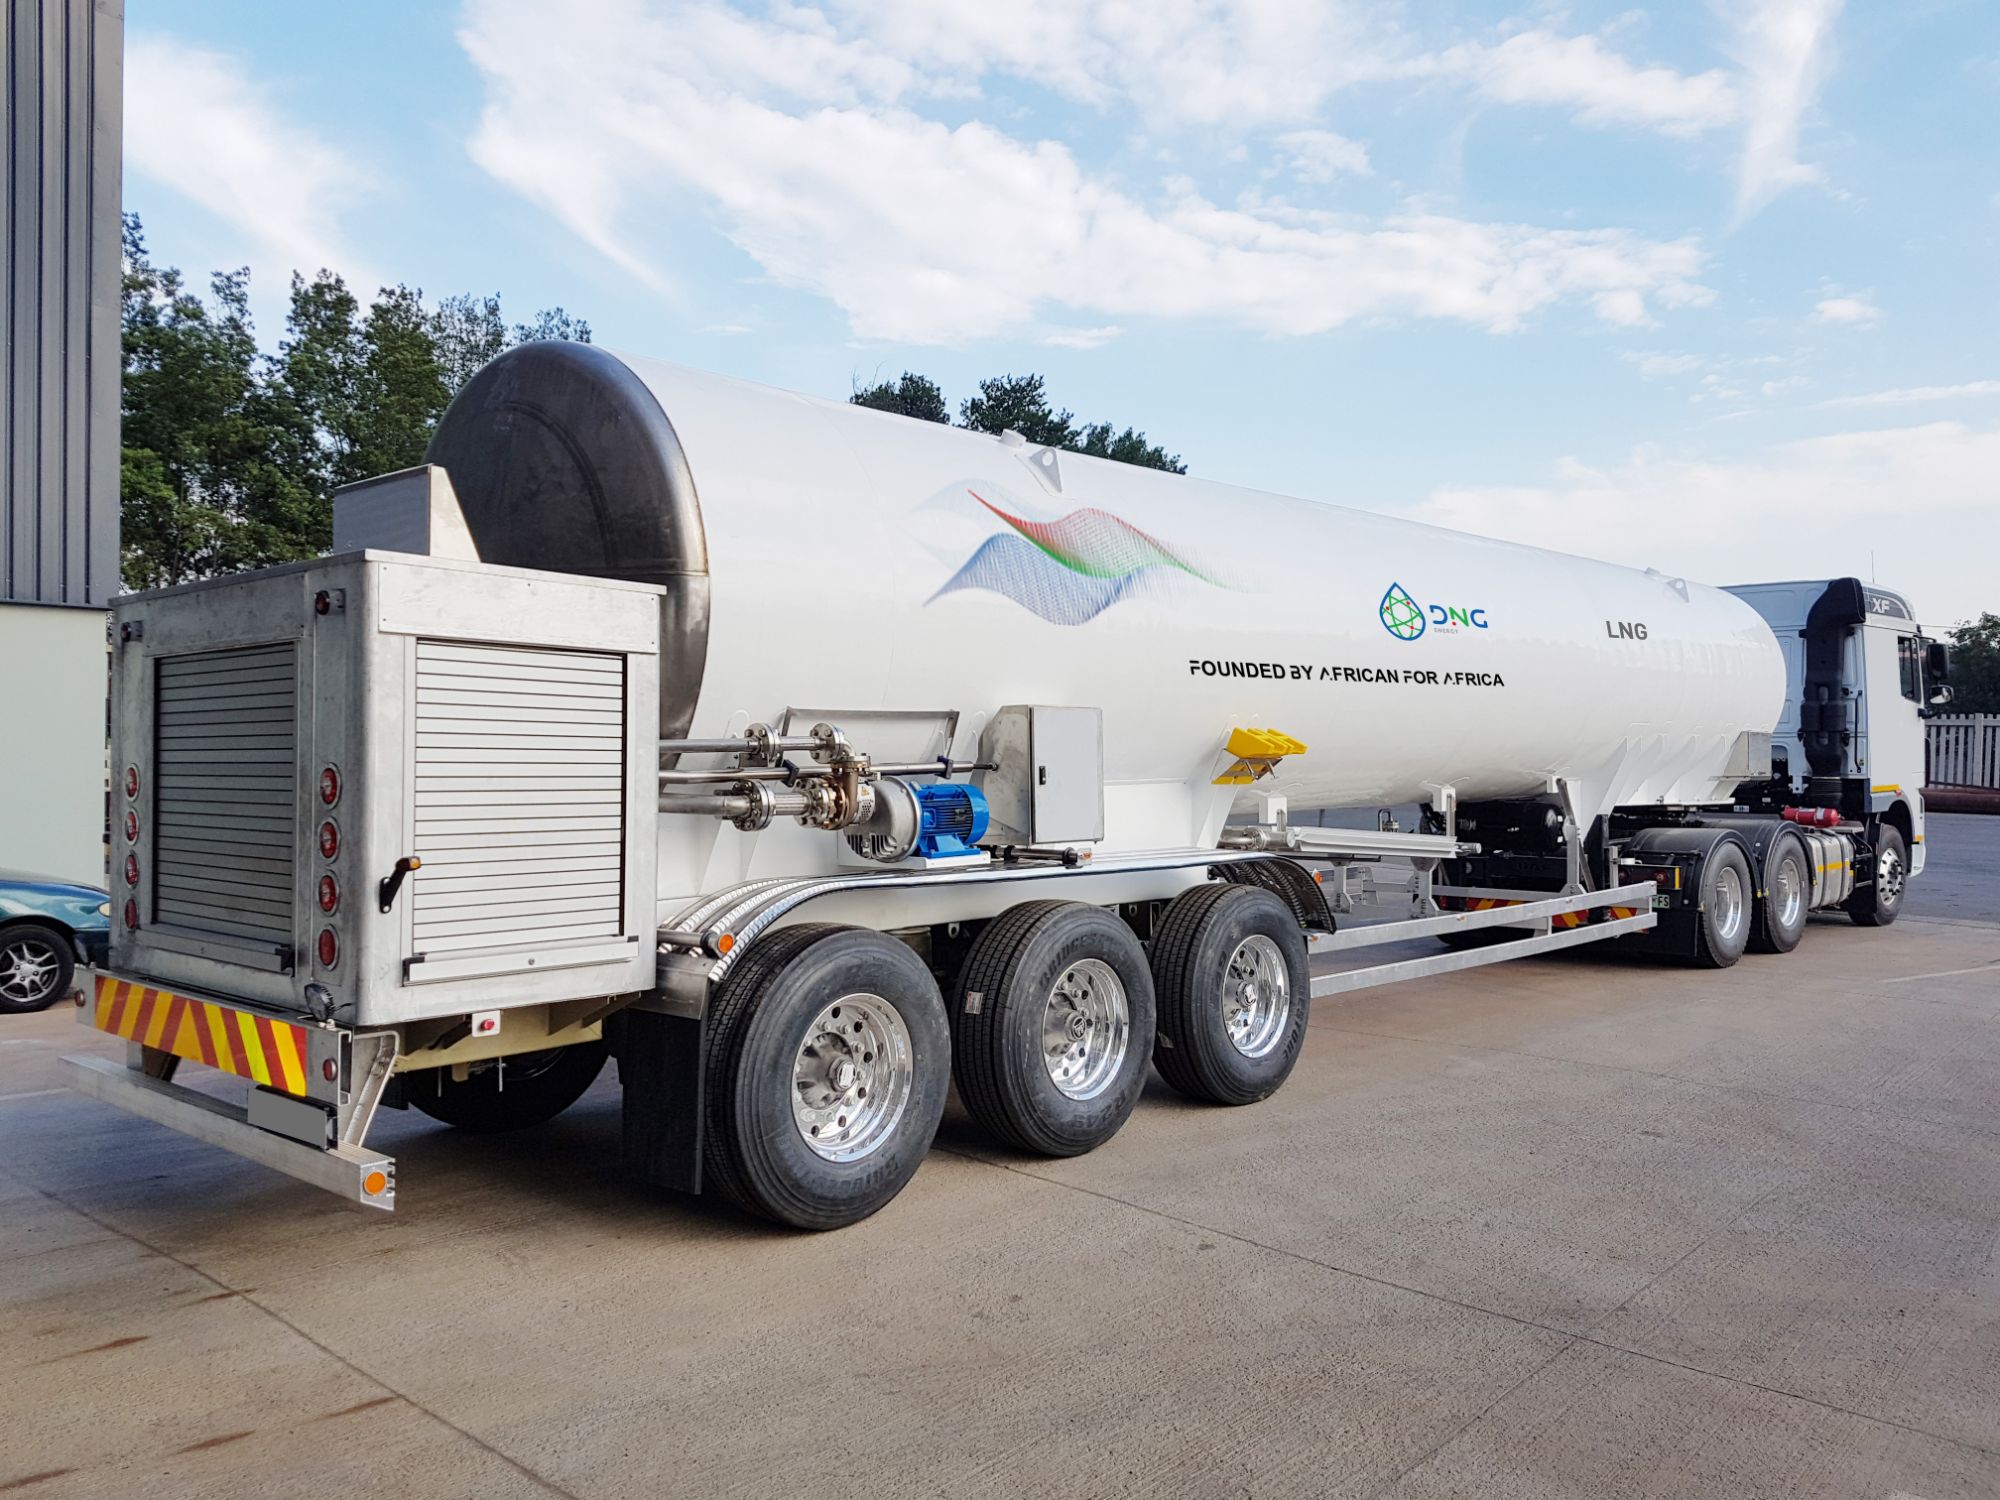 South Africa's DNG Energy to test LNG fuel in transport